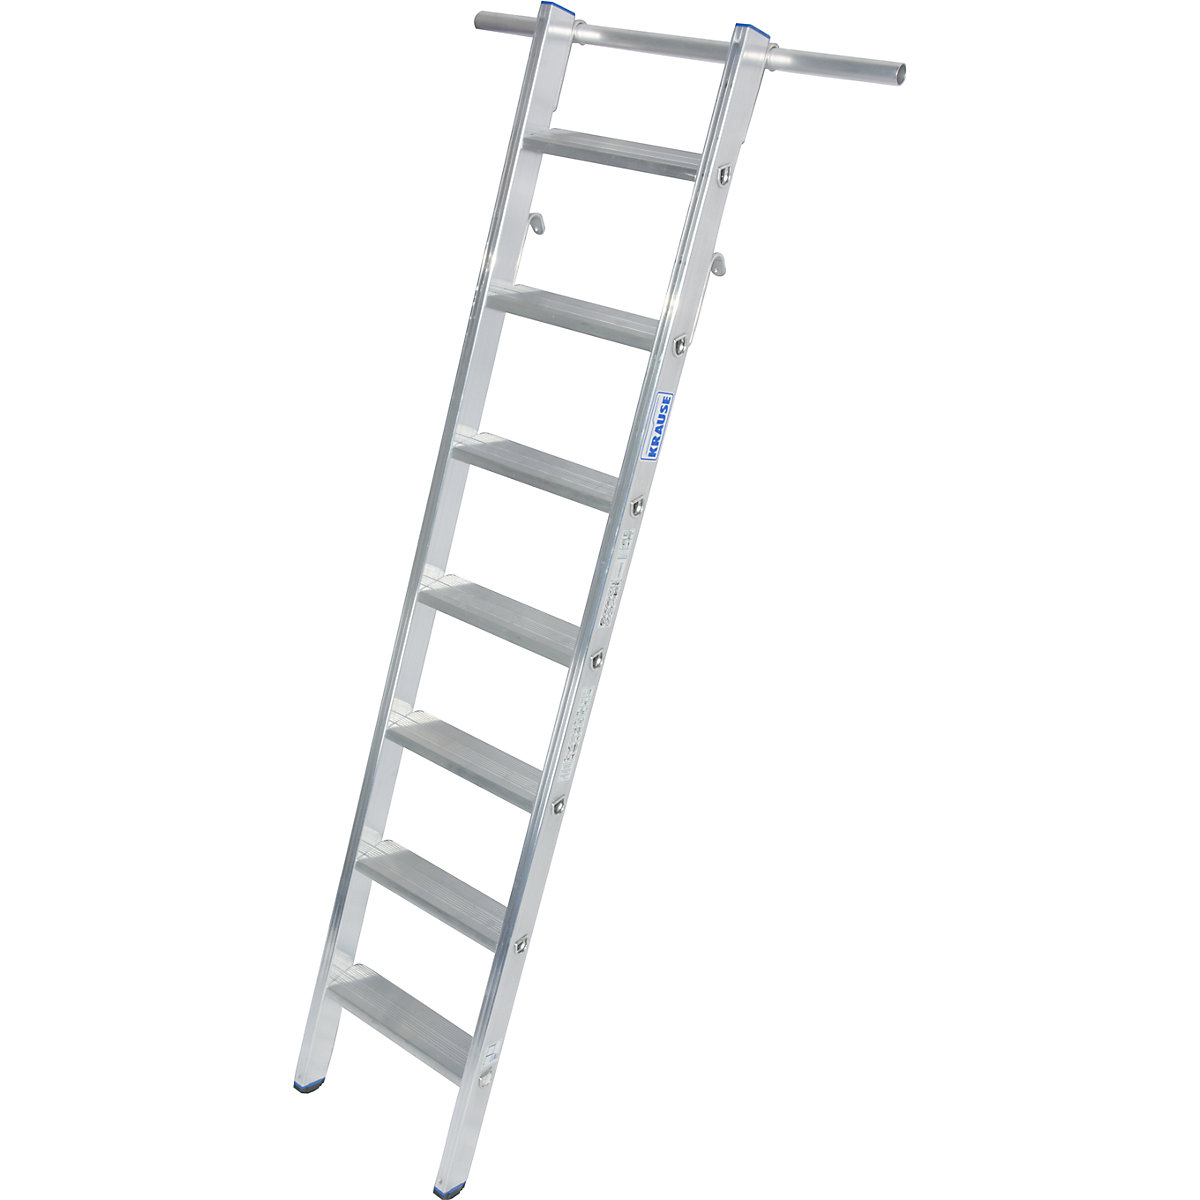 KRAUSE – Step shelf ladder, can be suspended, 2 pairs of suspension hooks, 7 steps